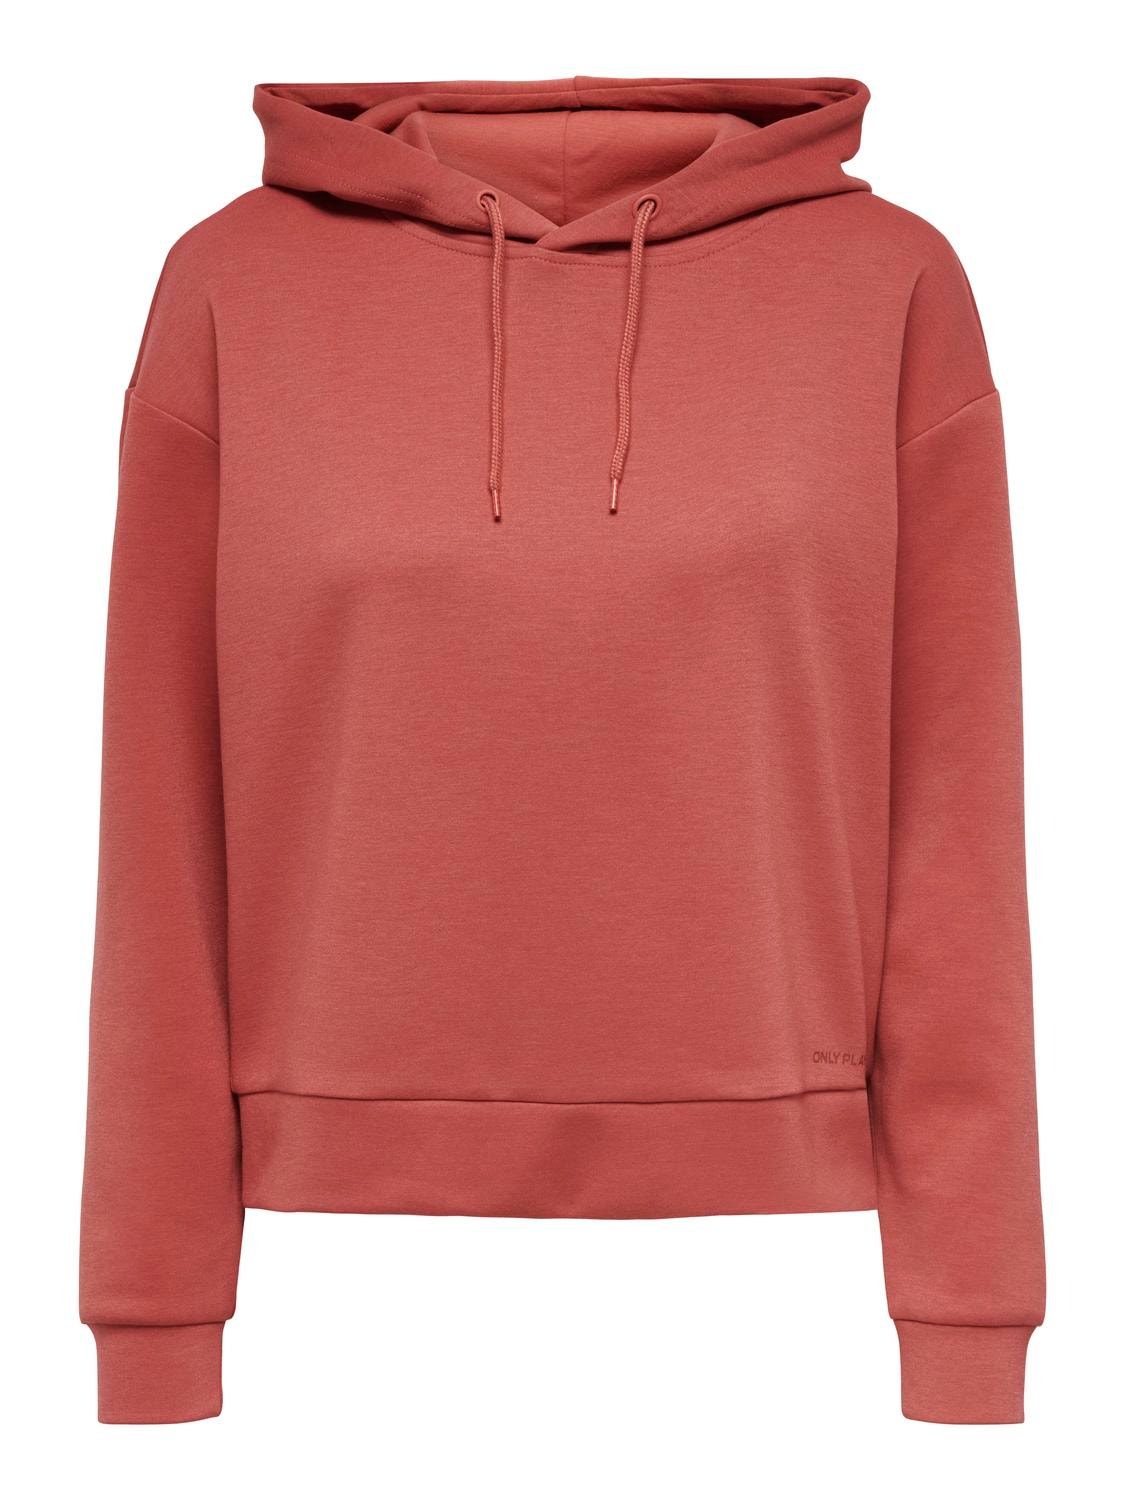 ONLY Couleur unie Sweat à capuche -Mineral Red - 15245850